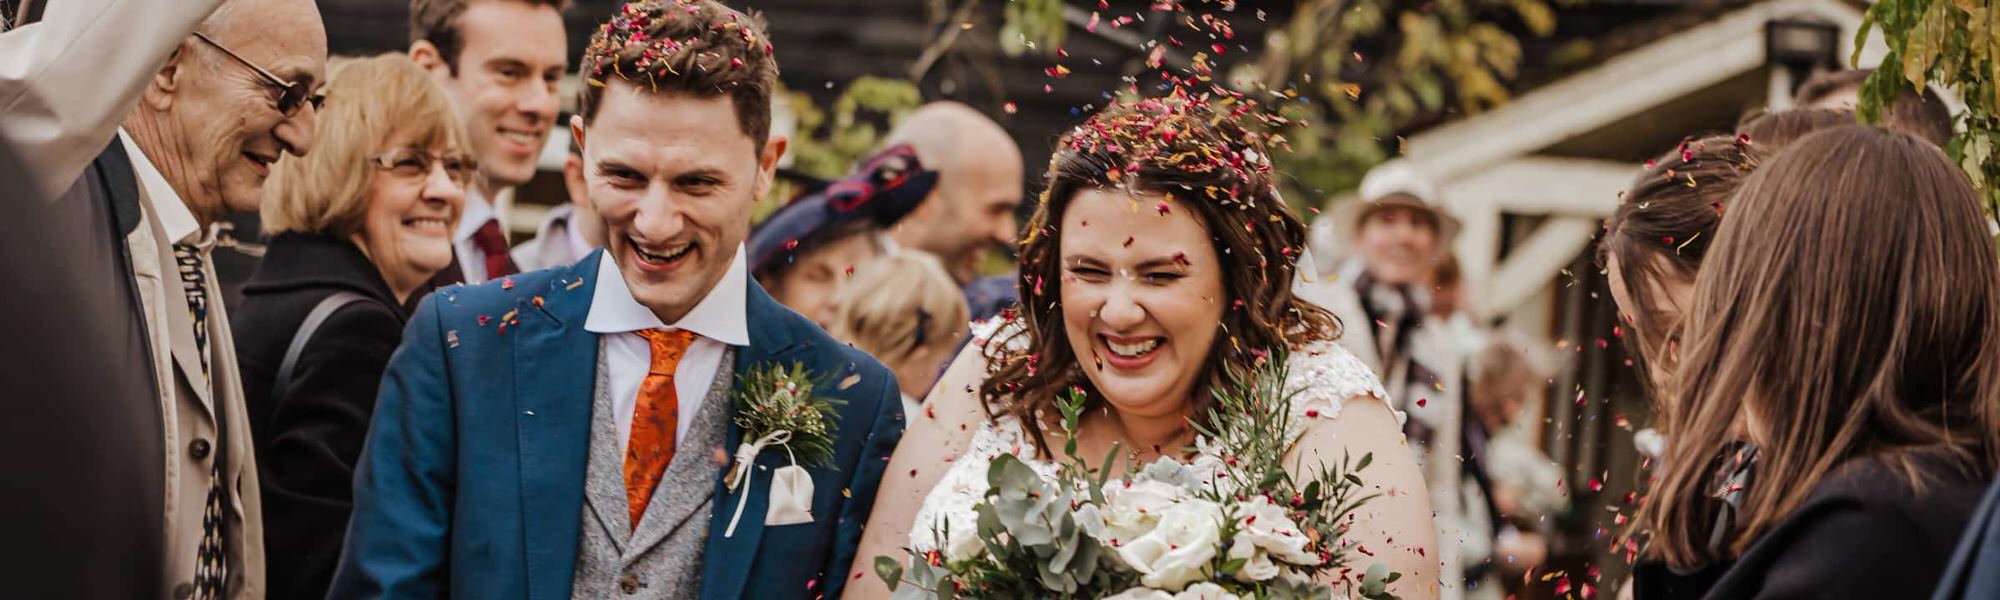 Bride and groom had confetti thrown at them when leaving the ceremony